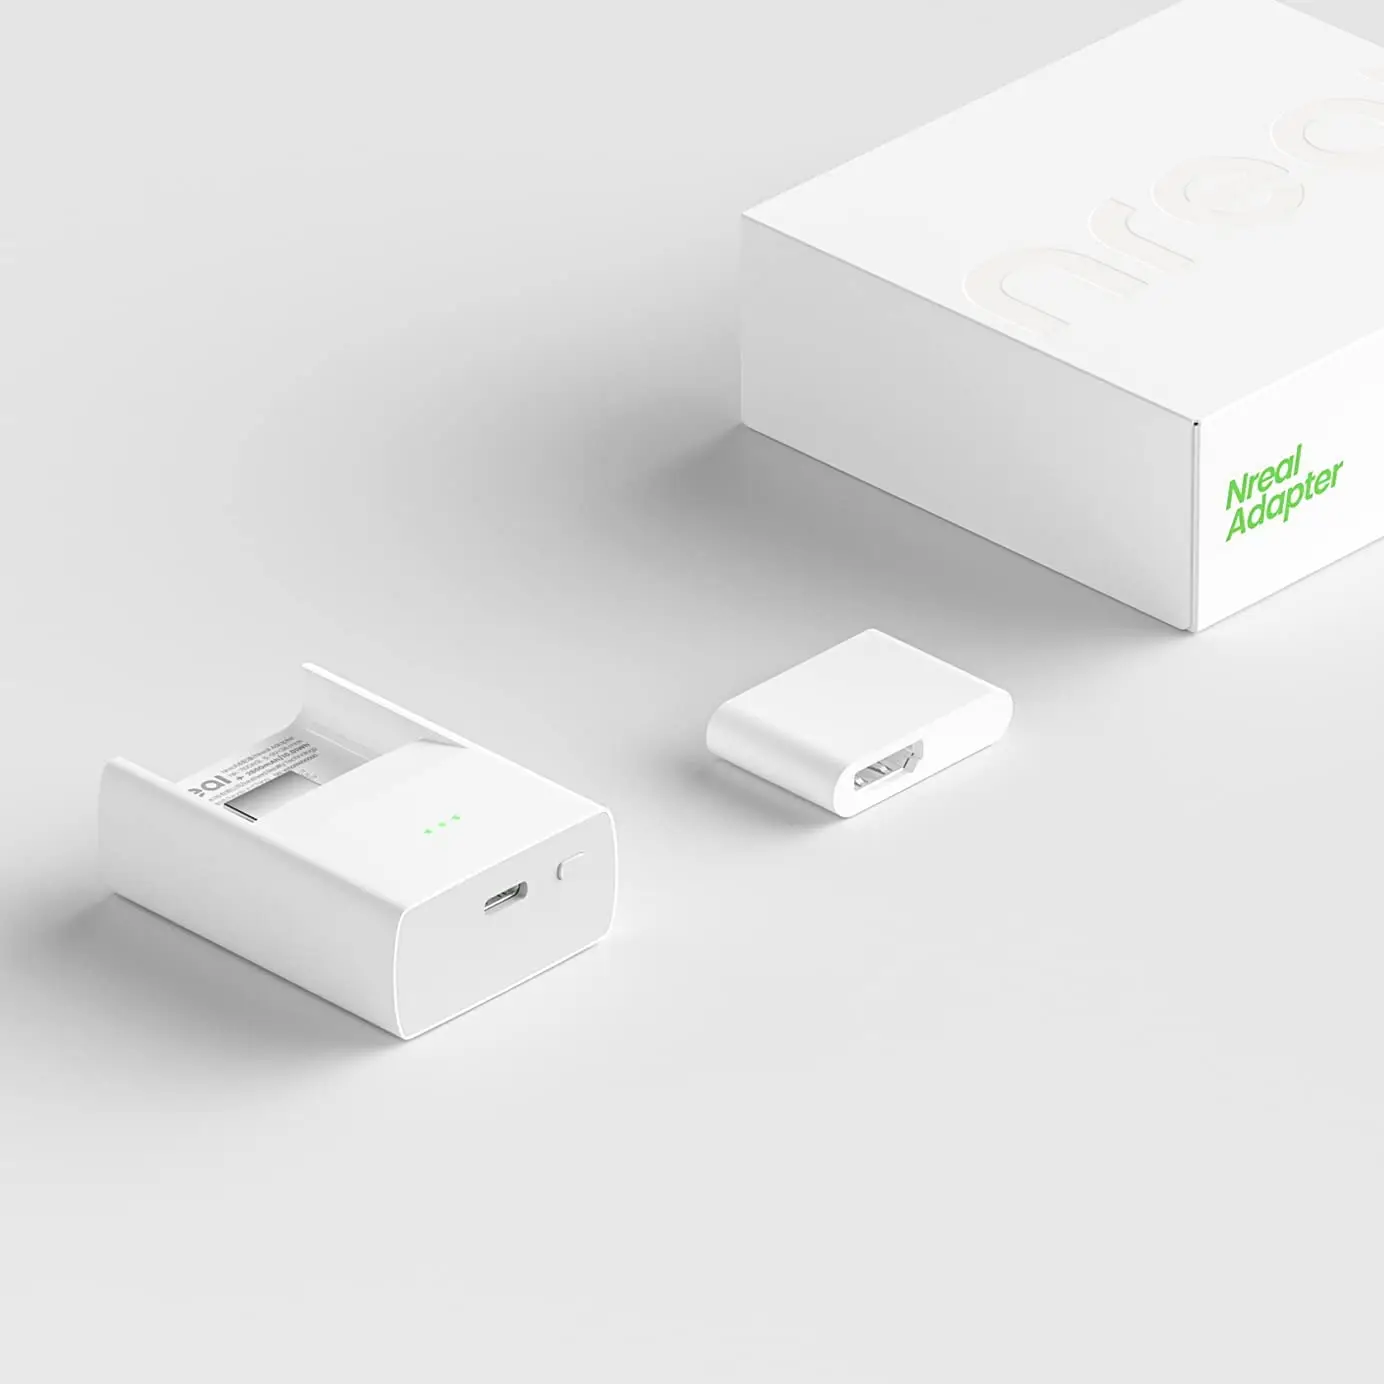 XREAL Nreal Air Adapter, Connects to iPhone via Lightning to HDMI 